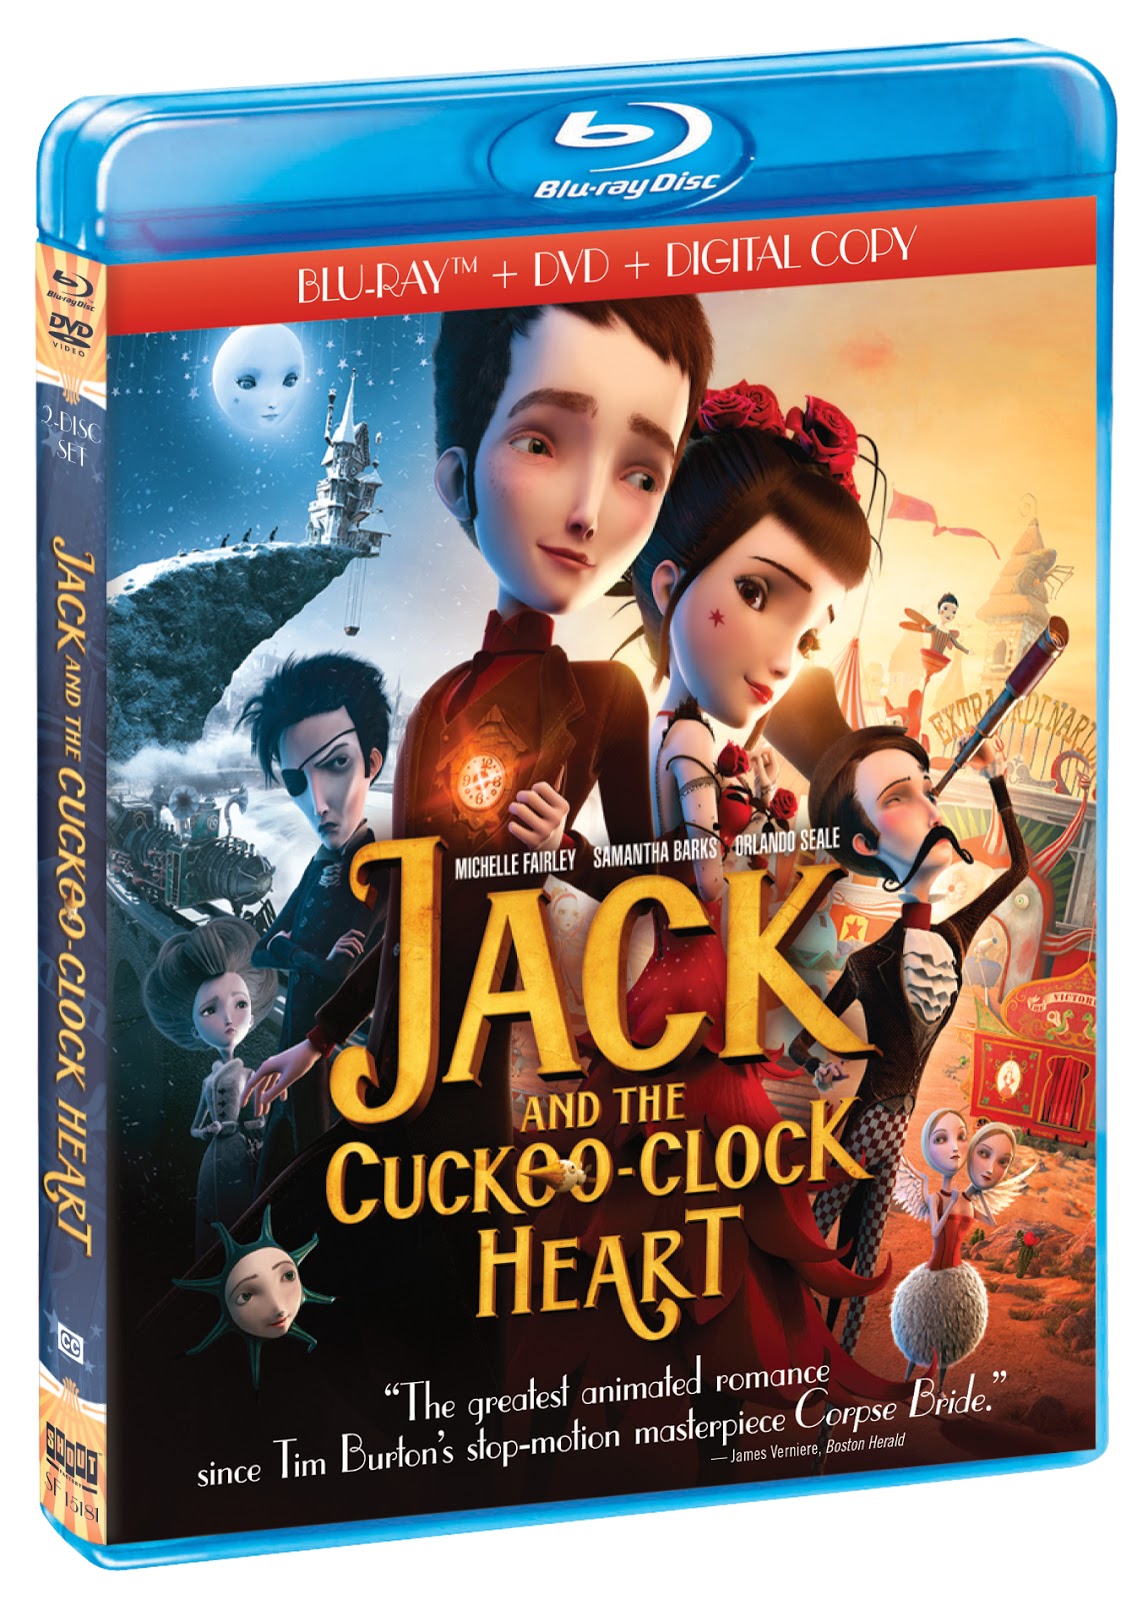 Jack and The Cuckoo Clock Heart Blu-ray Review